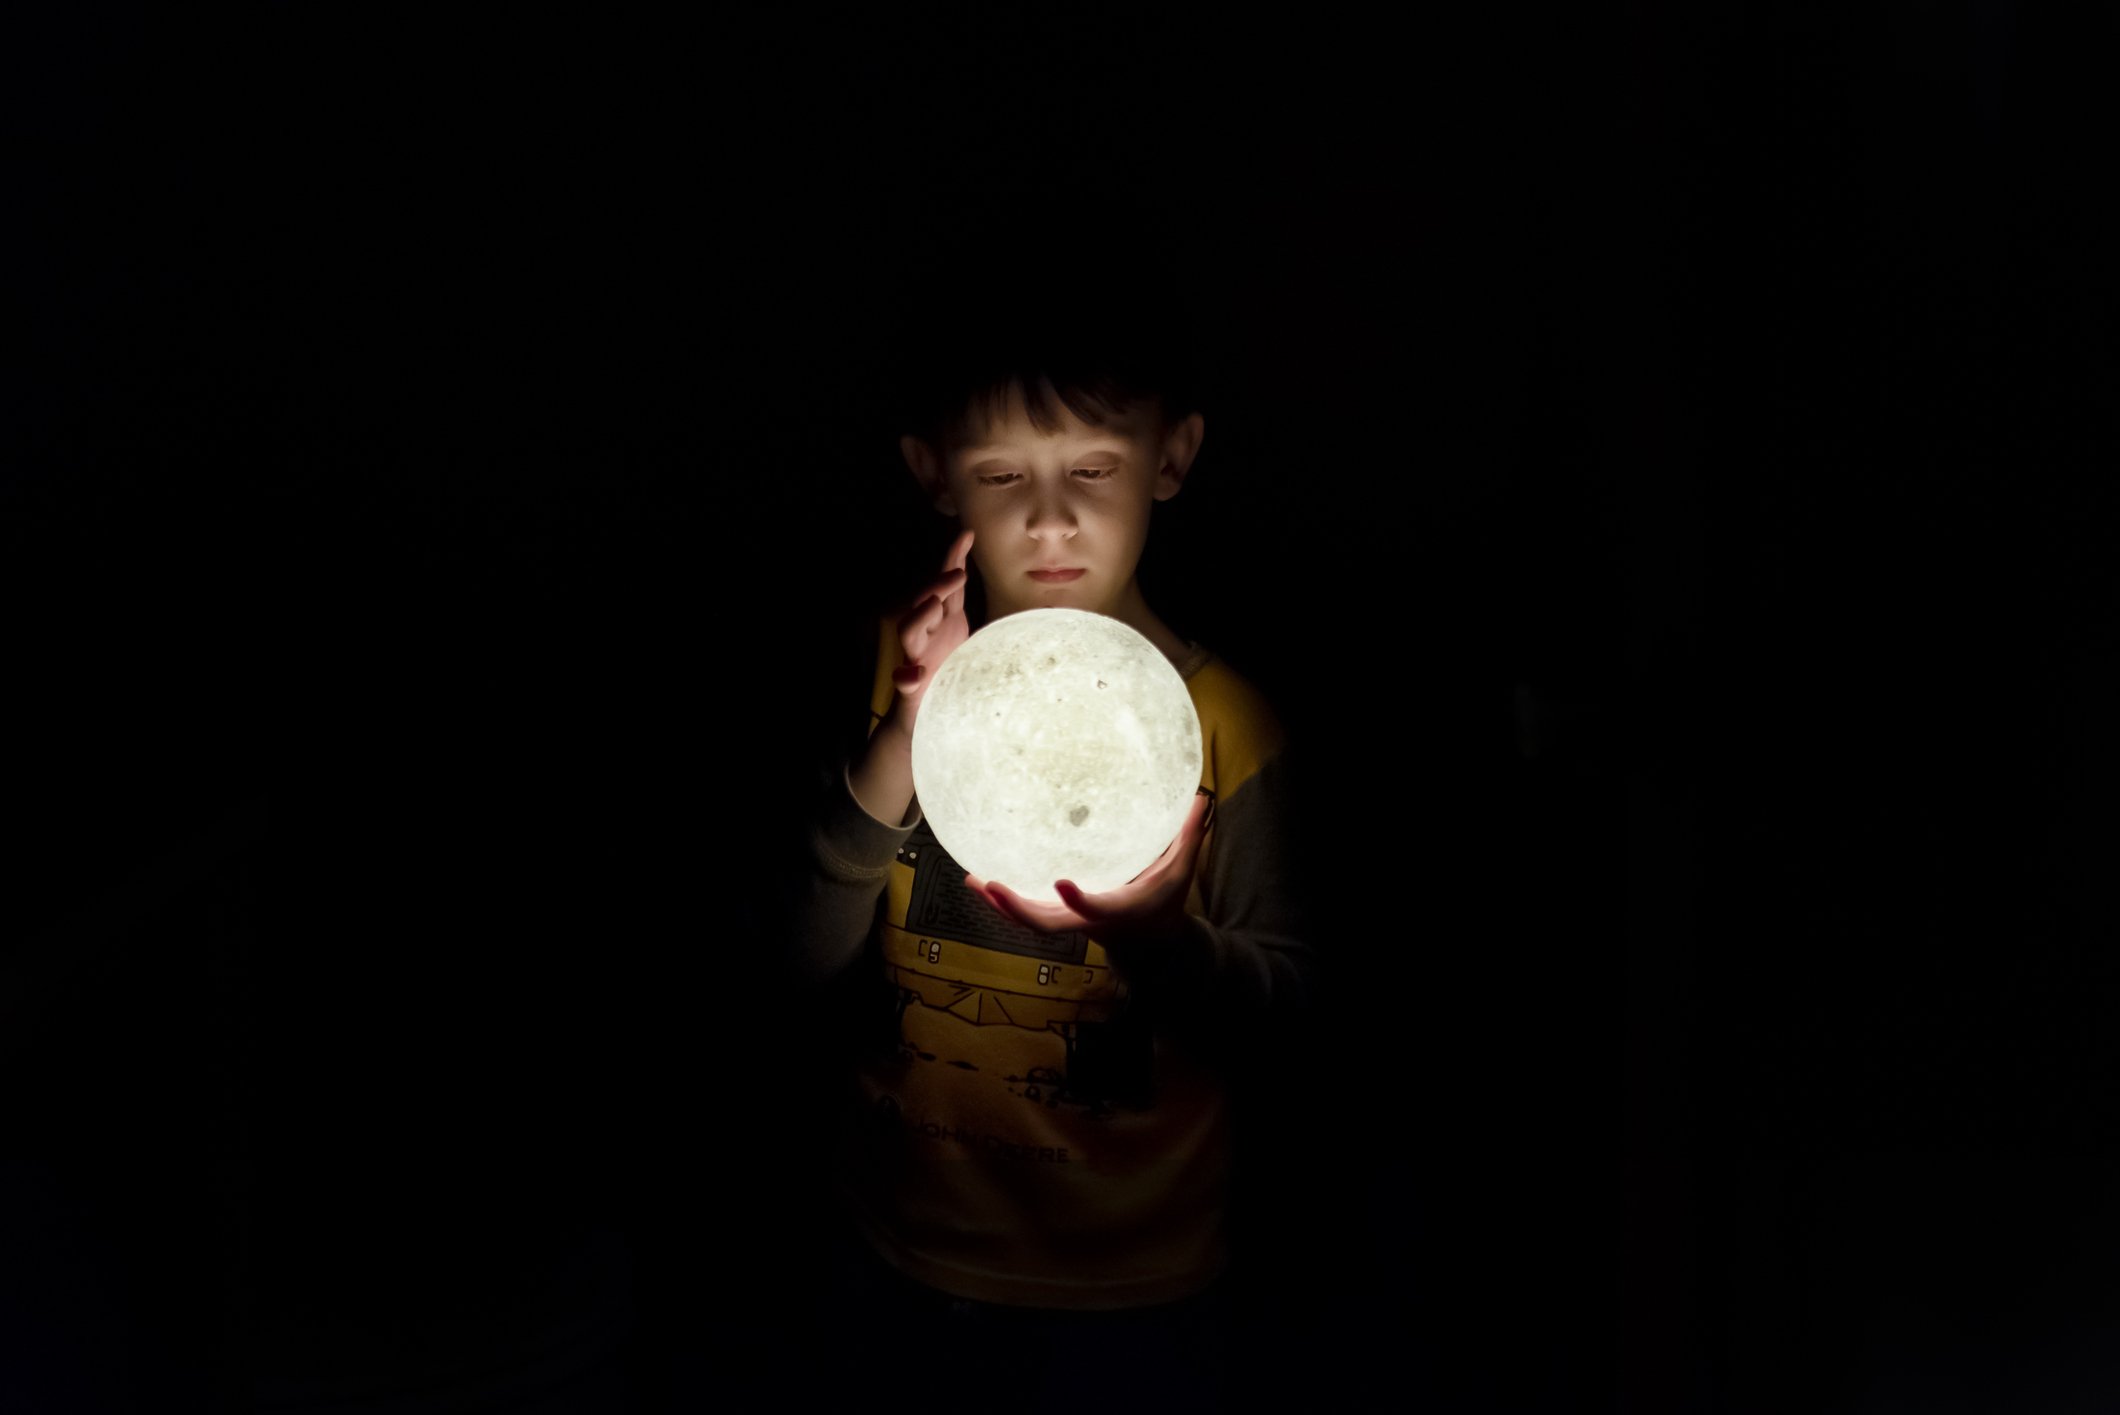 A young boy Looking Into a 3D Moon Lamp. | Photo: Getty Images